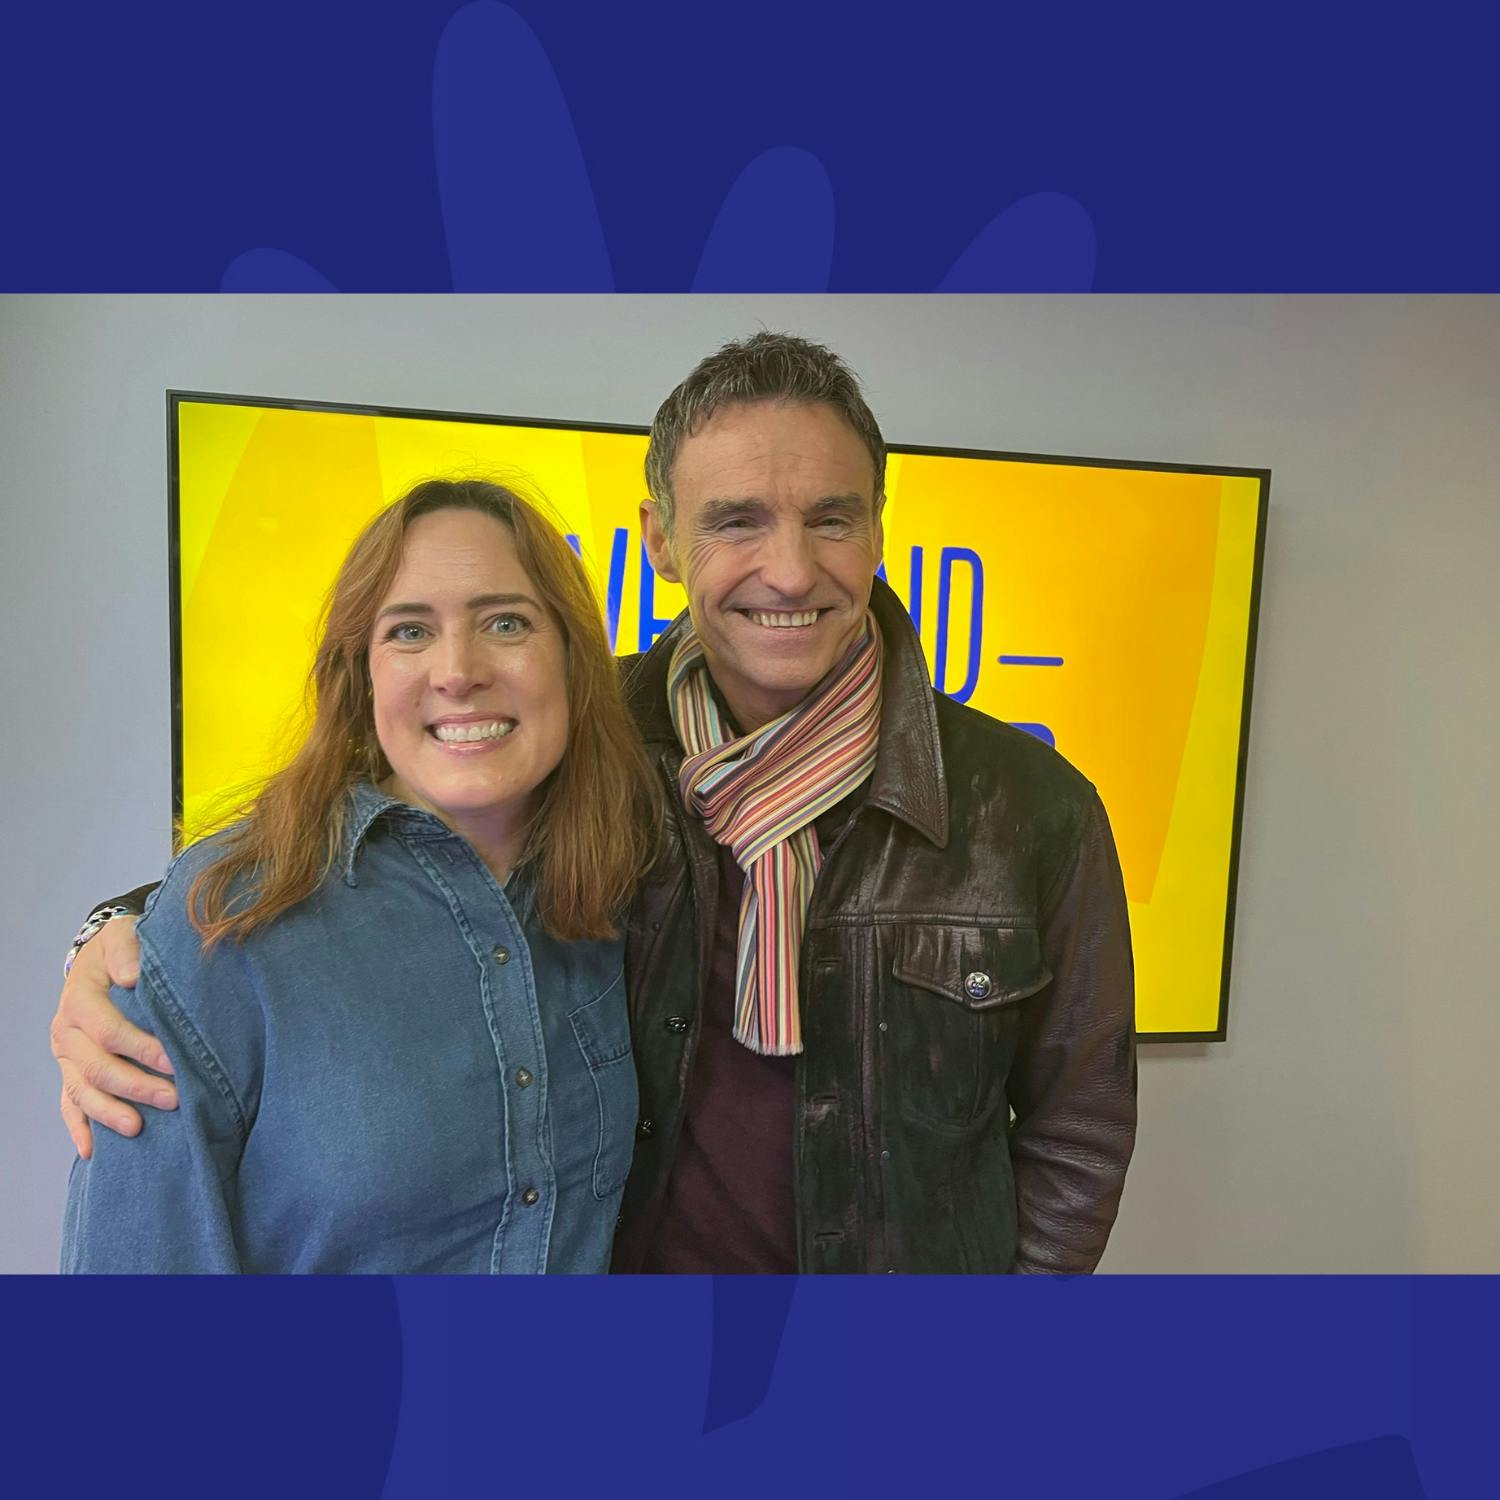 Marti Pellow Talks About HIs Incredible Career And Makes Us Laugh A LOT!